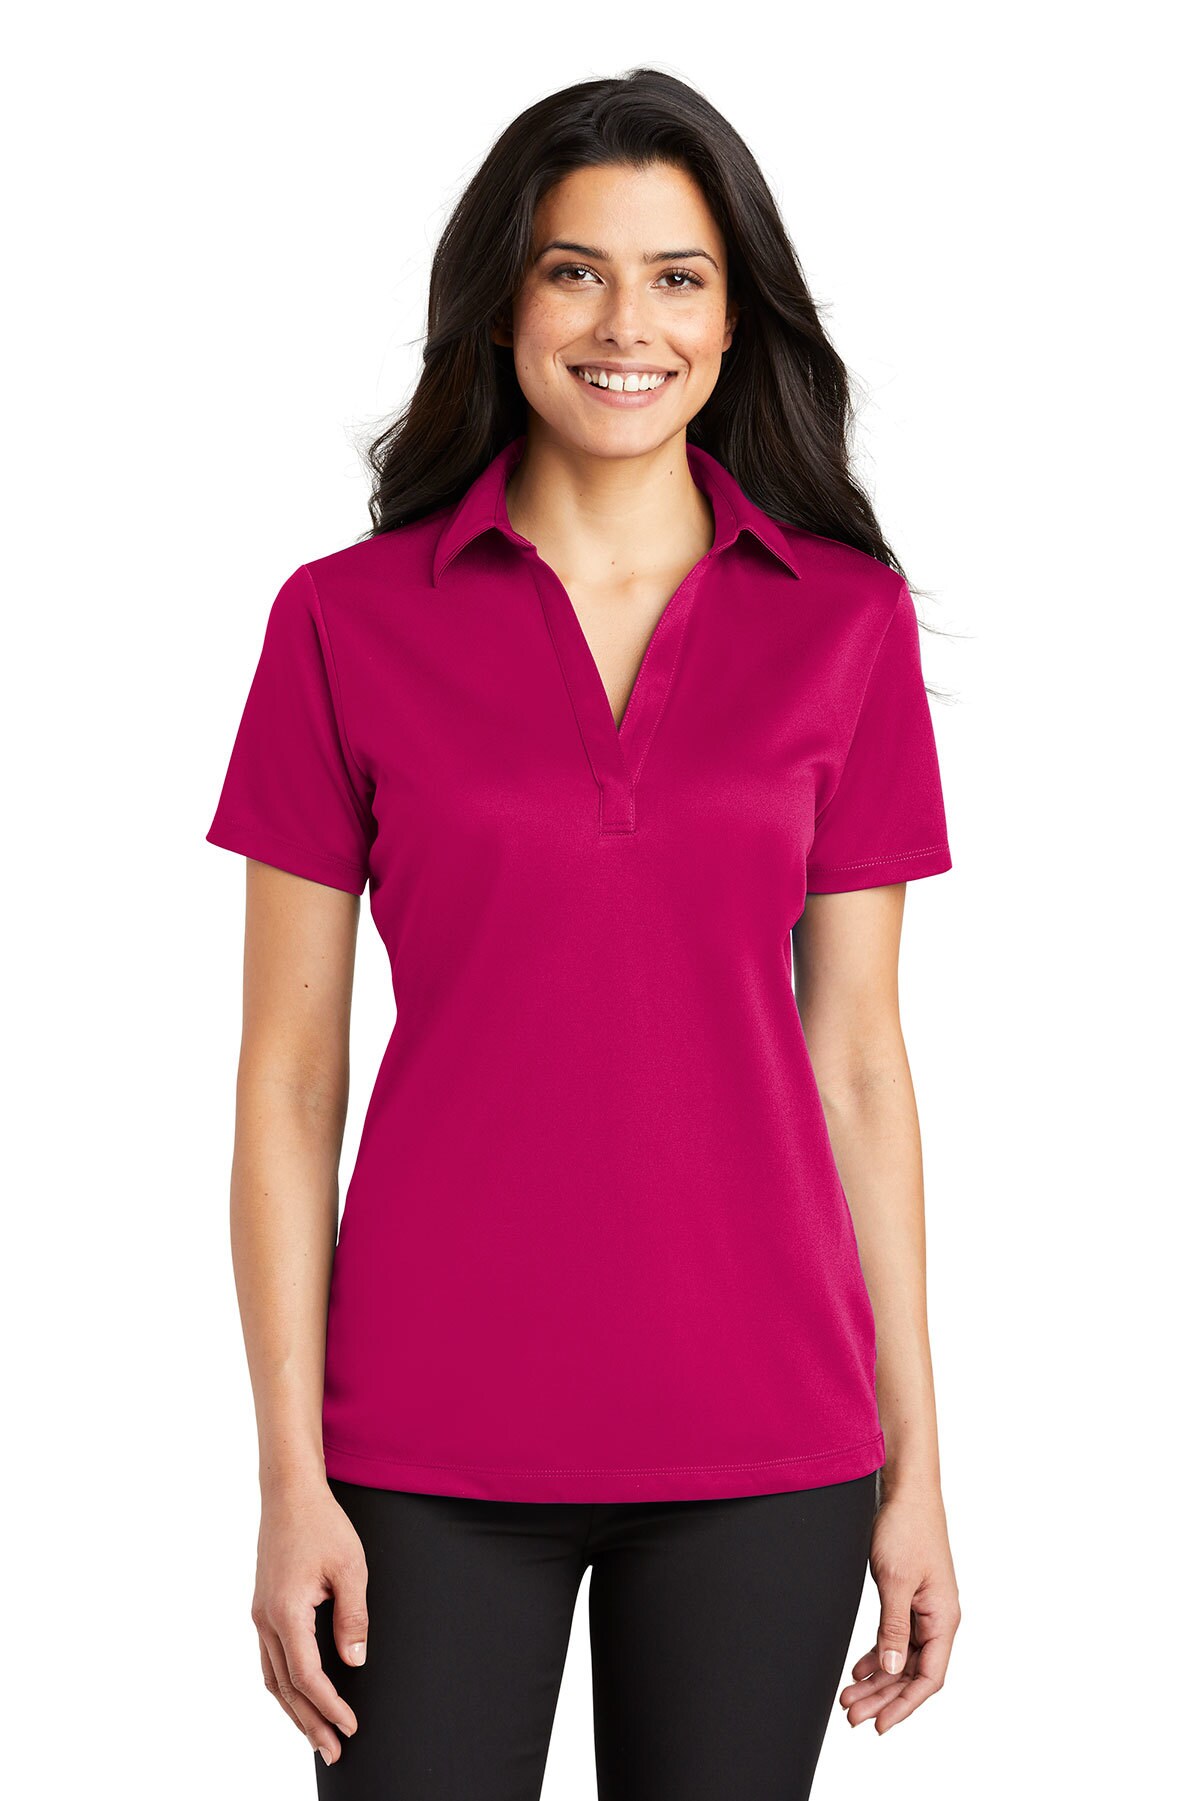 Premium Performance Polo T-shirt for Women, 4-ounce, 100% polyester Tees, Female Polo T-Shirt – Where Fashion Meets Function for the Modern  Trendsetter, RADYAN